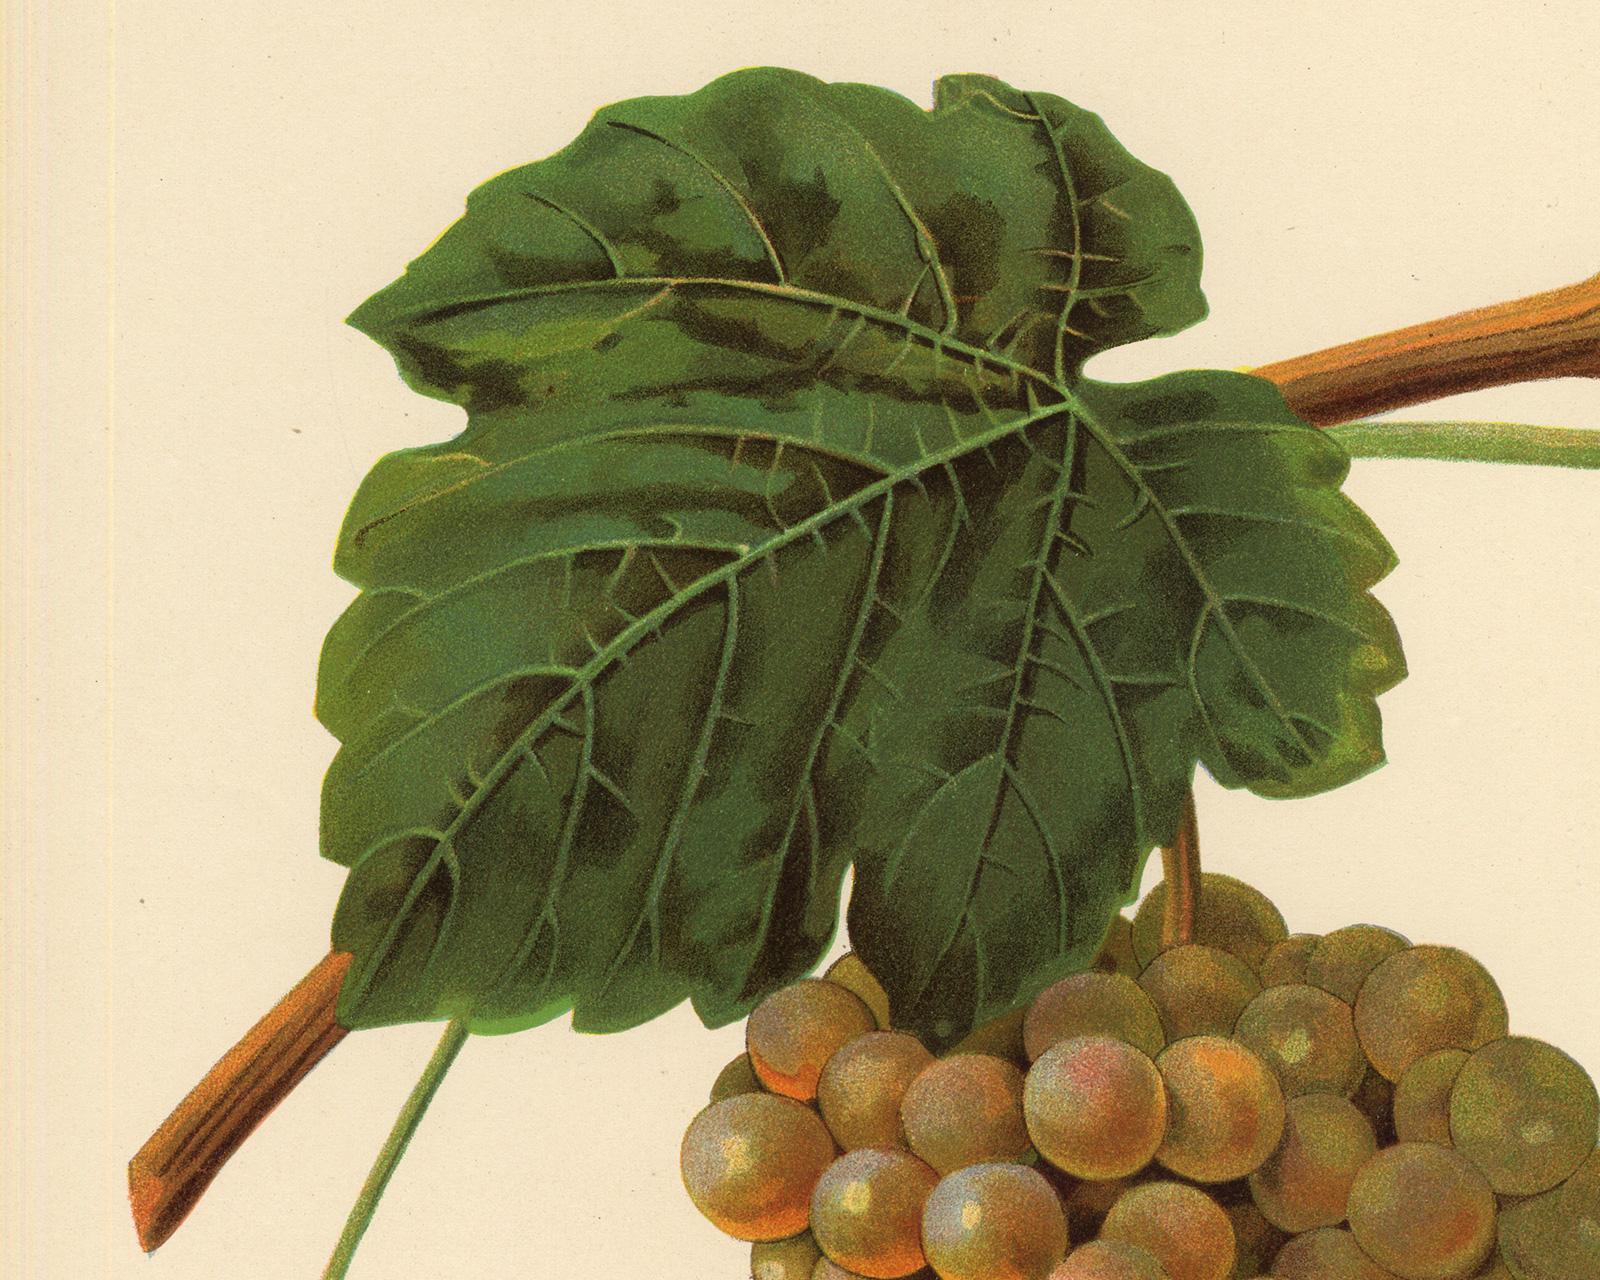 The Jean grape - from Ampelography by Vermorel - Lithograph - Early 20th century - Beige Print by Victor Vermorel